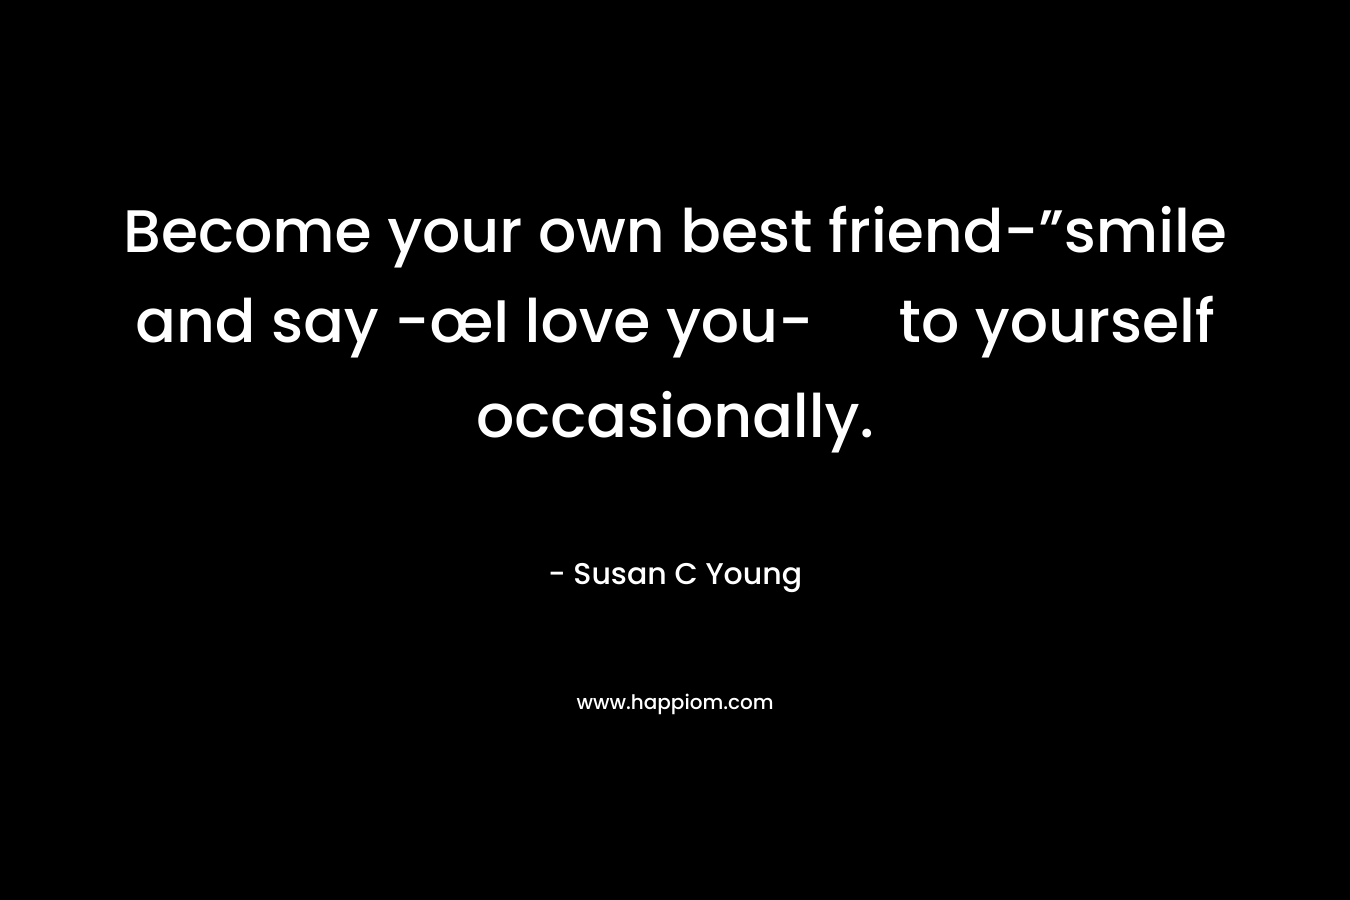 Become your own best friend-”smile and say -œI love you- to yourself occasionally.